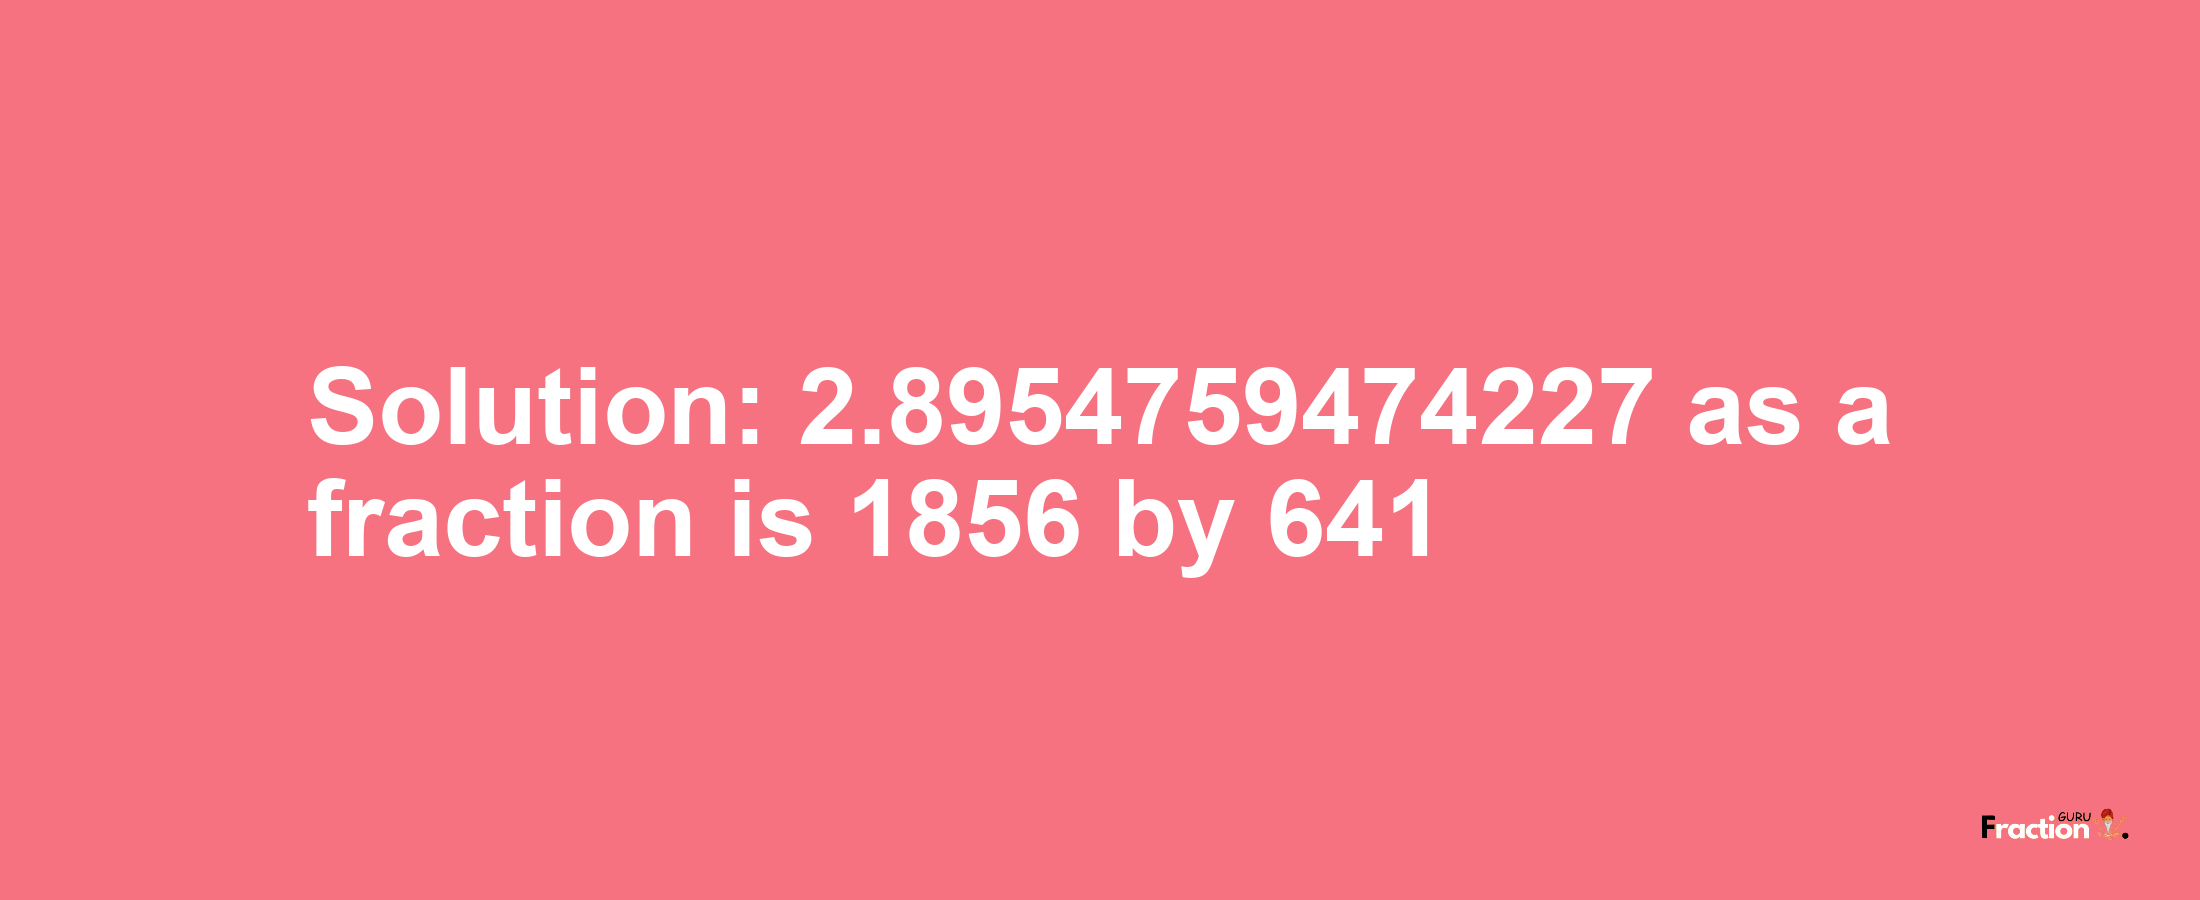 Solution:2.8954759474227 as a fraction is 1856/641